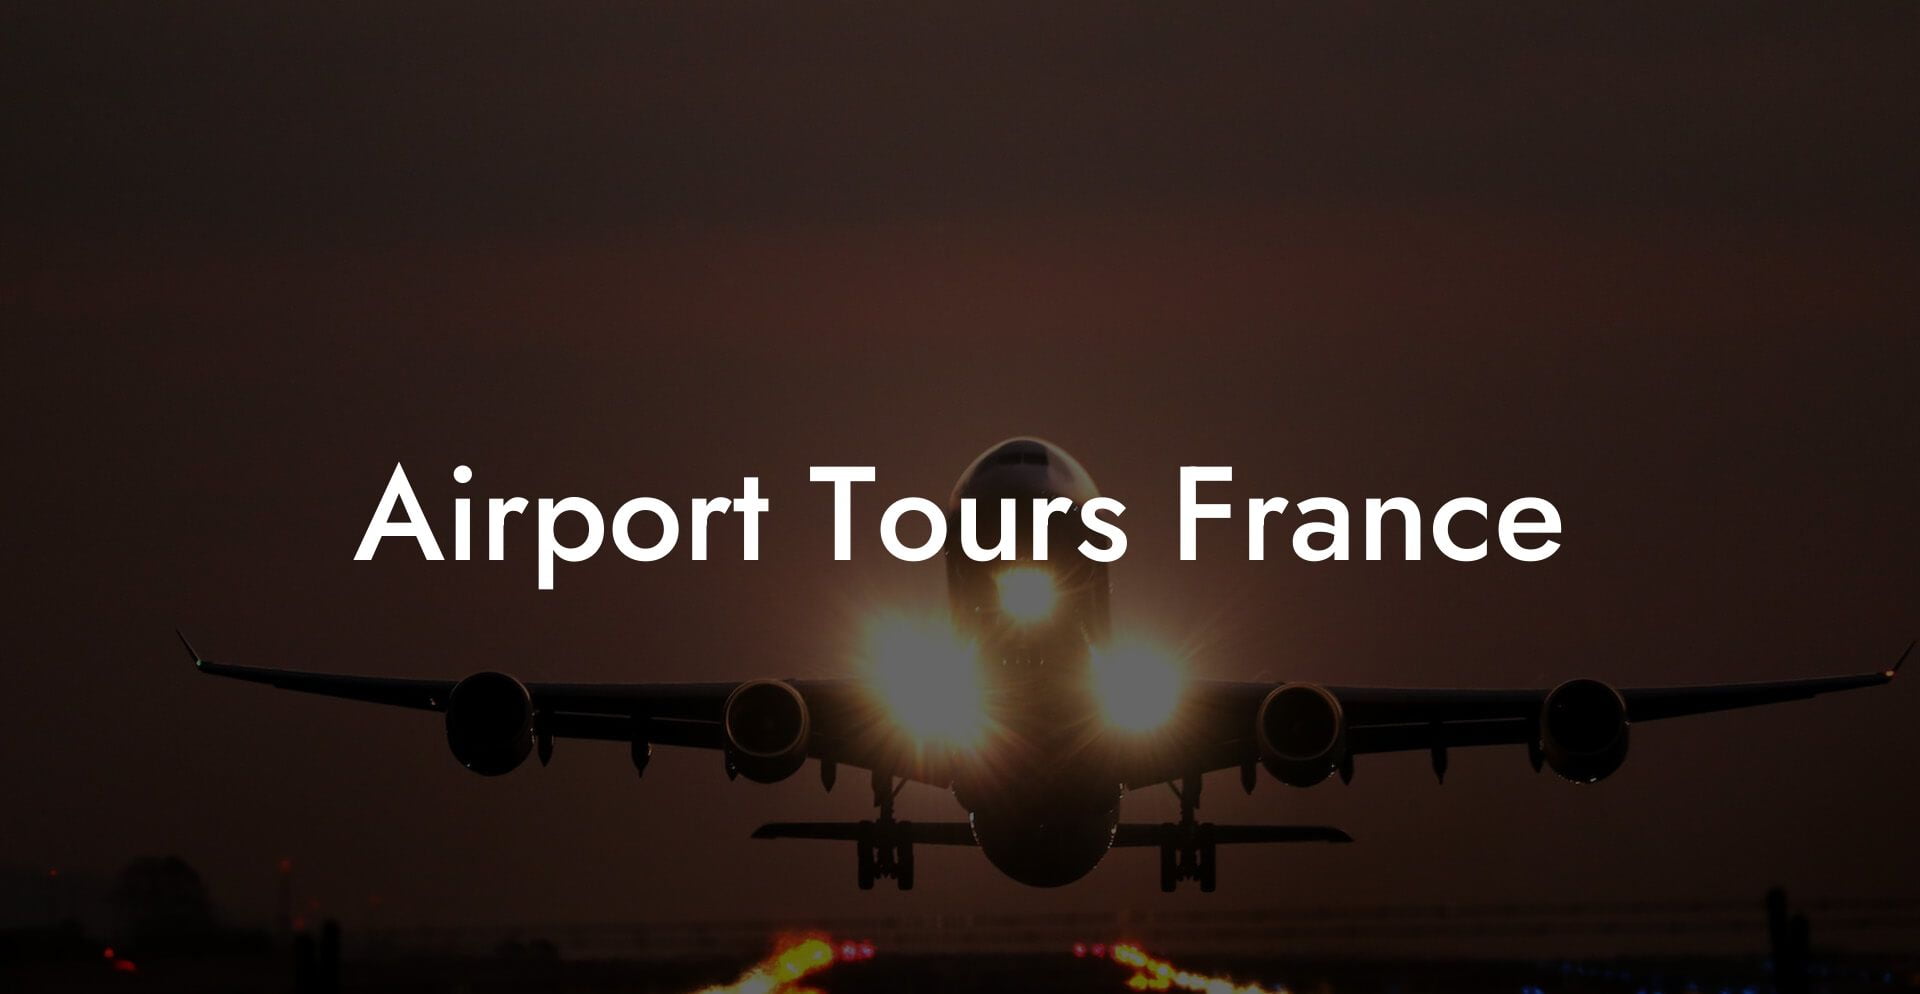 Airport Tours France